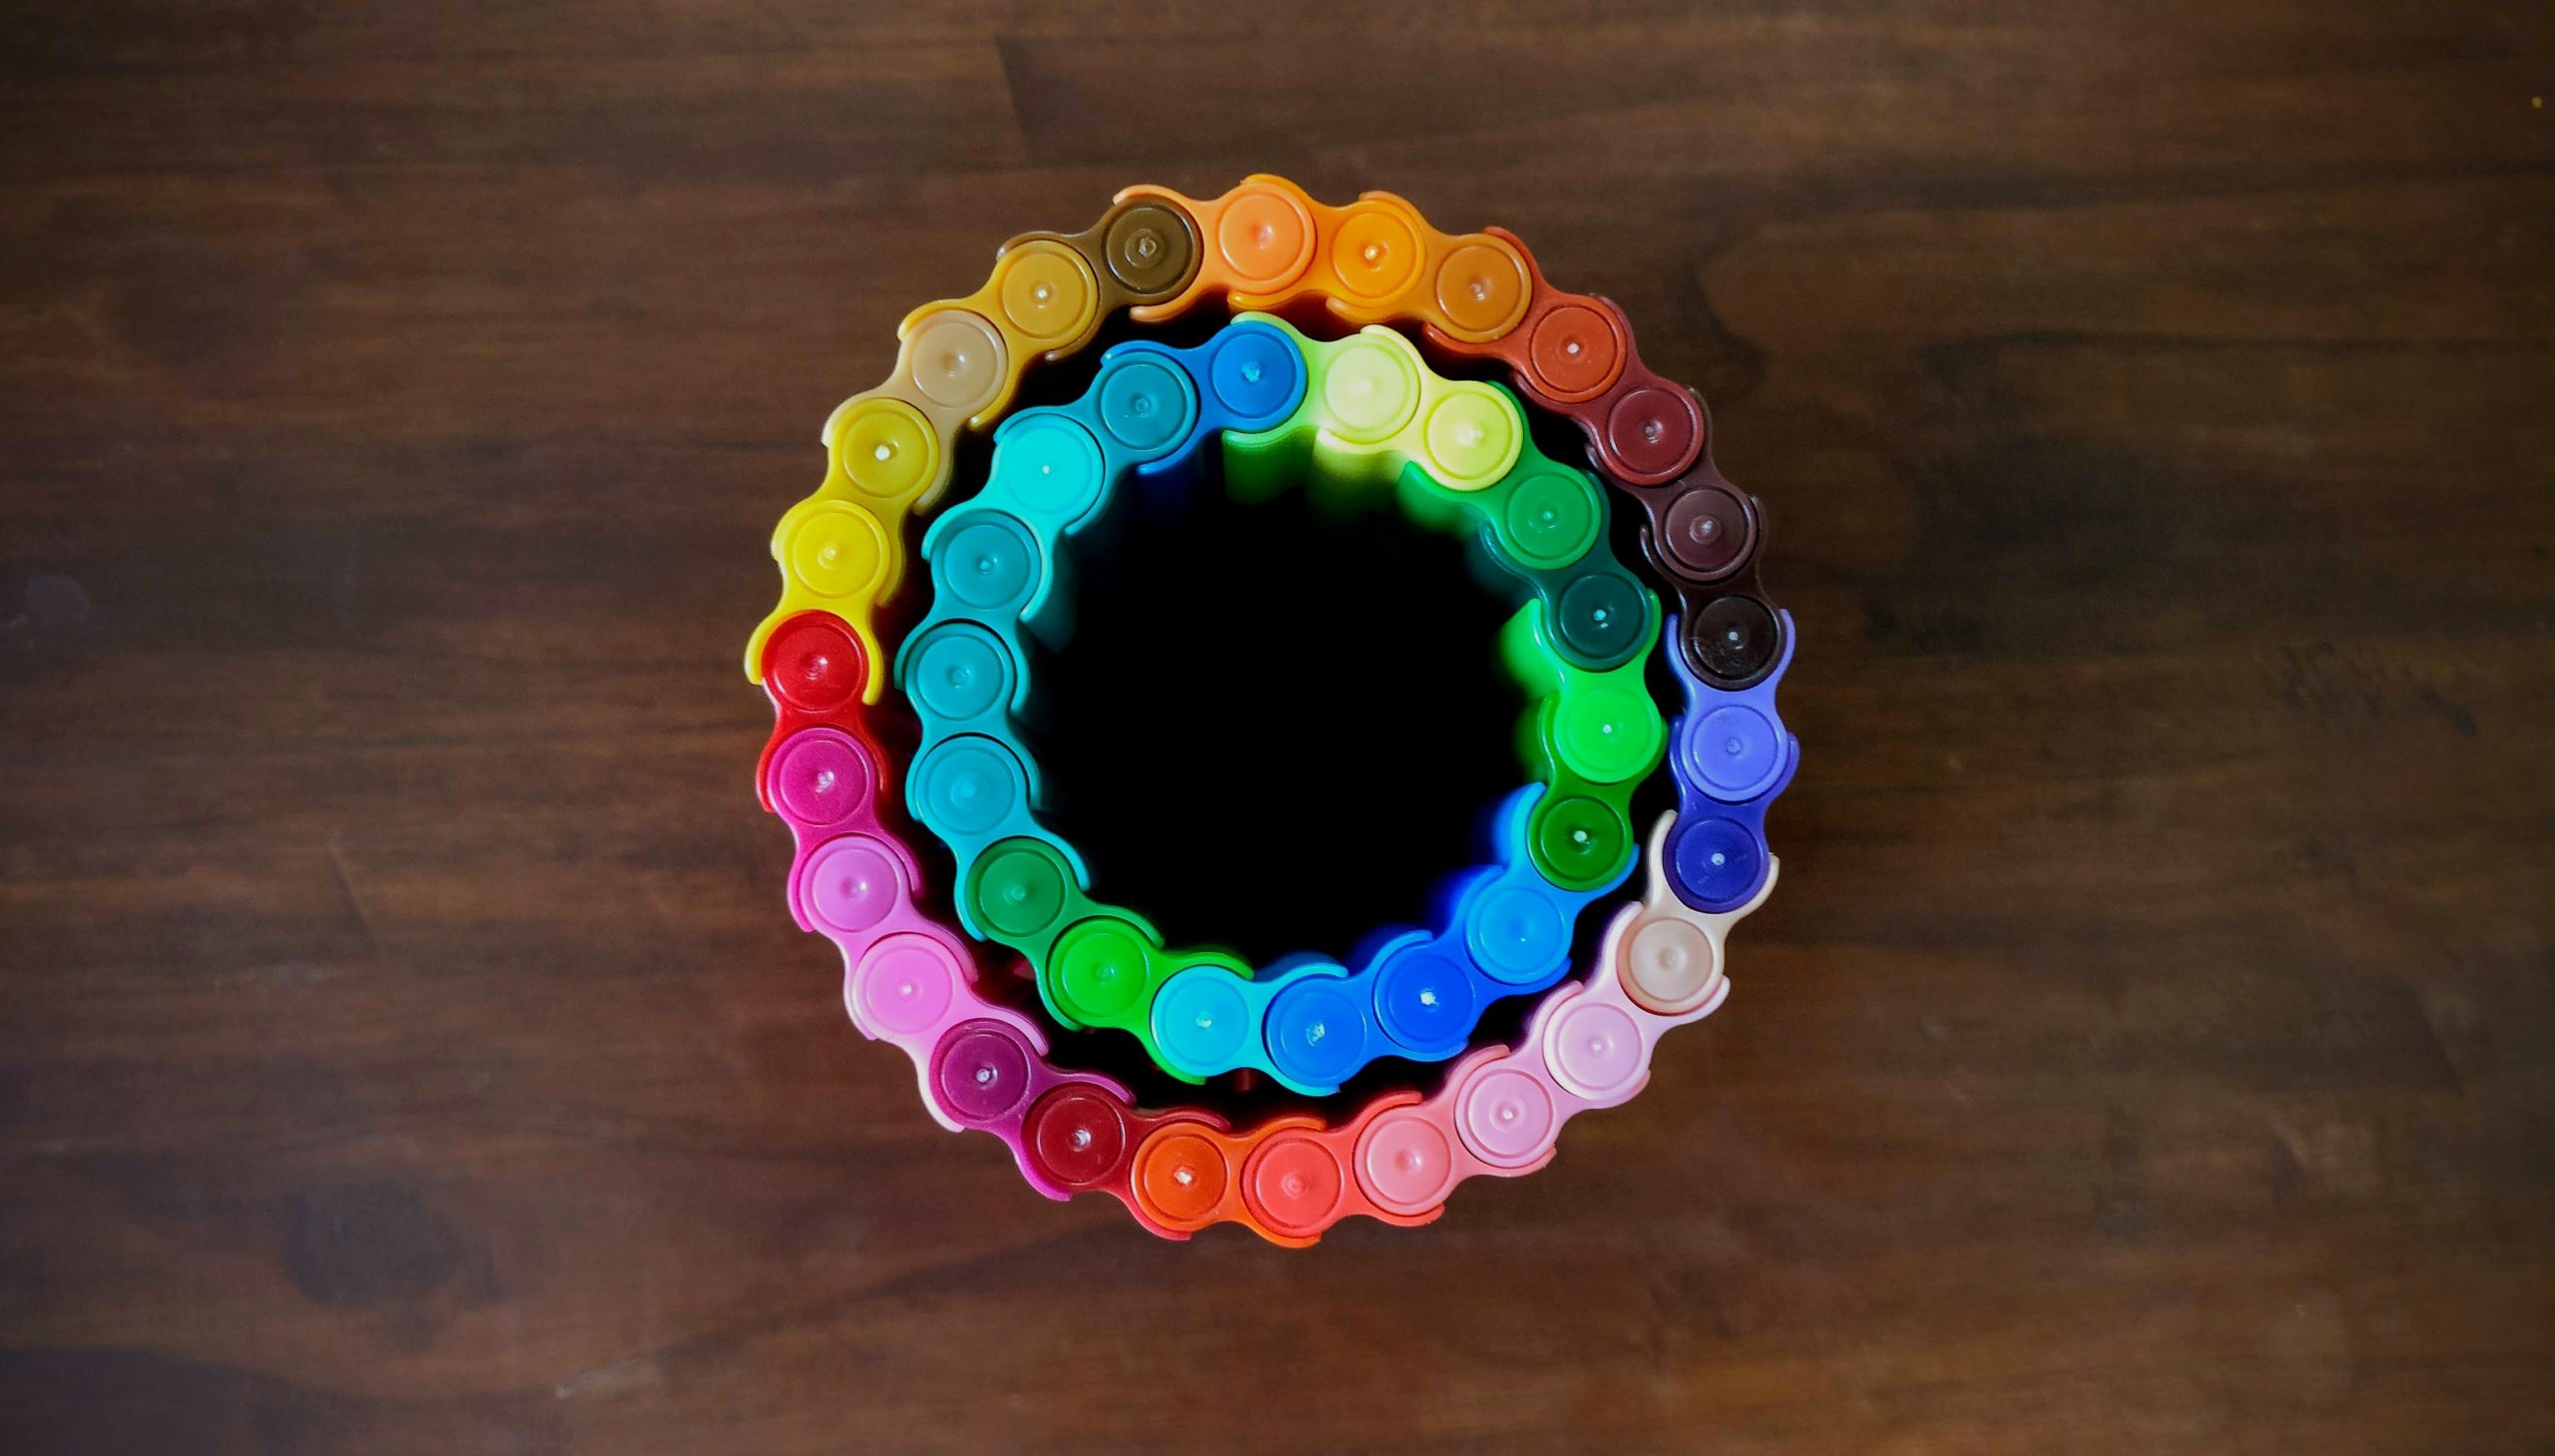 Different colour markers connected together in circles. The image is photographed from above so only the tops of the lids are visible. The table they're on is wood. It looks like two rainbow circles, one inside the other.